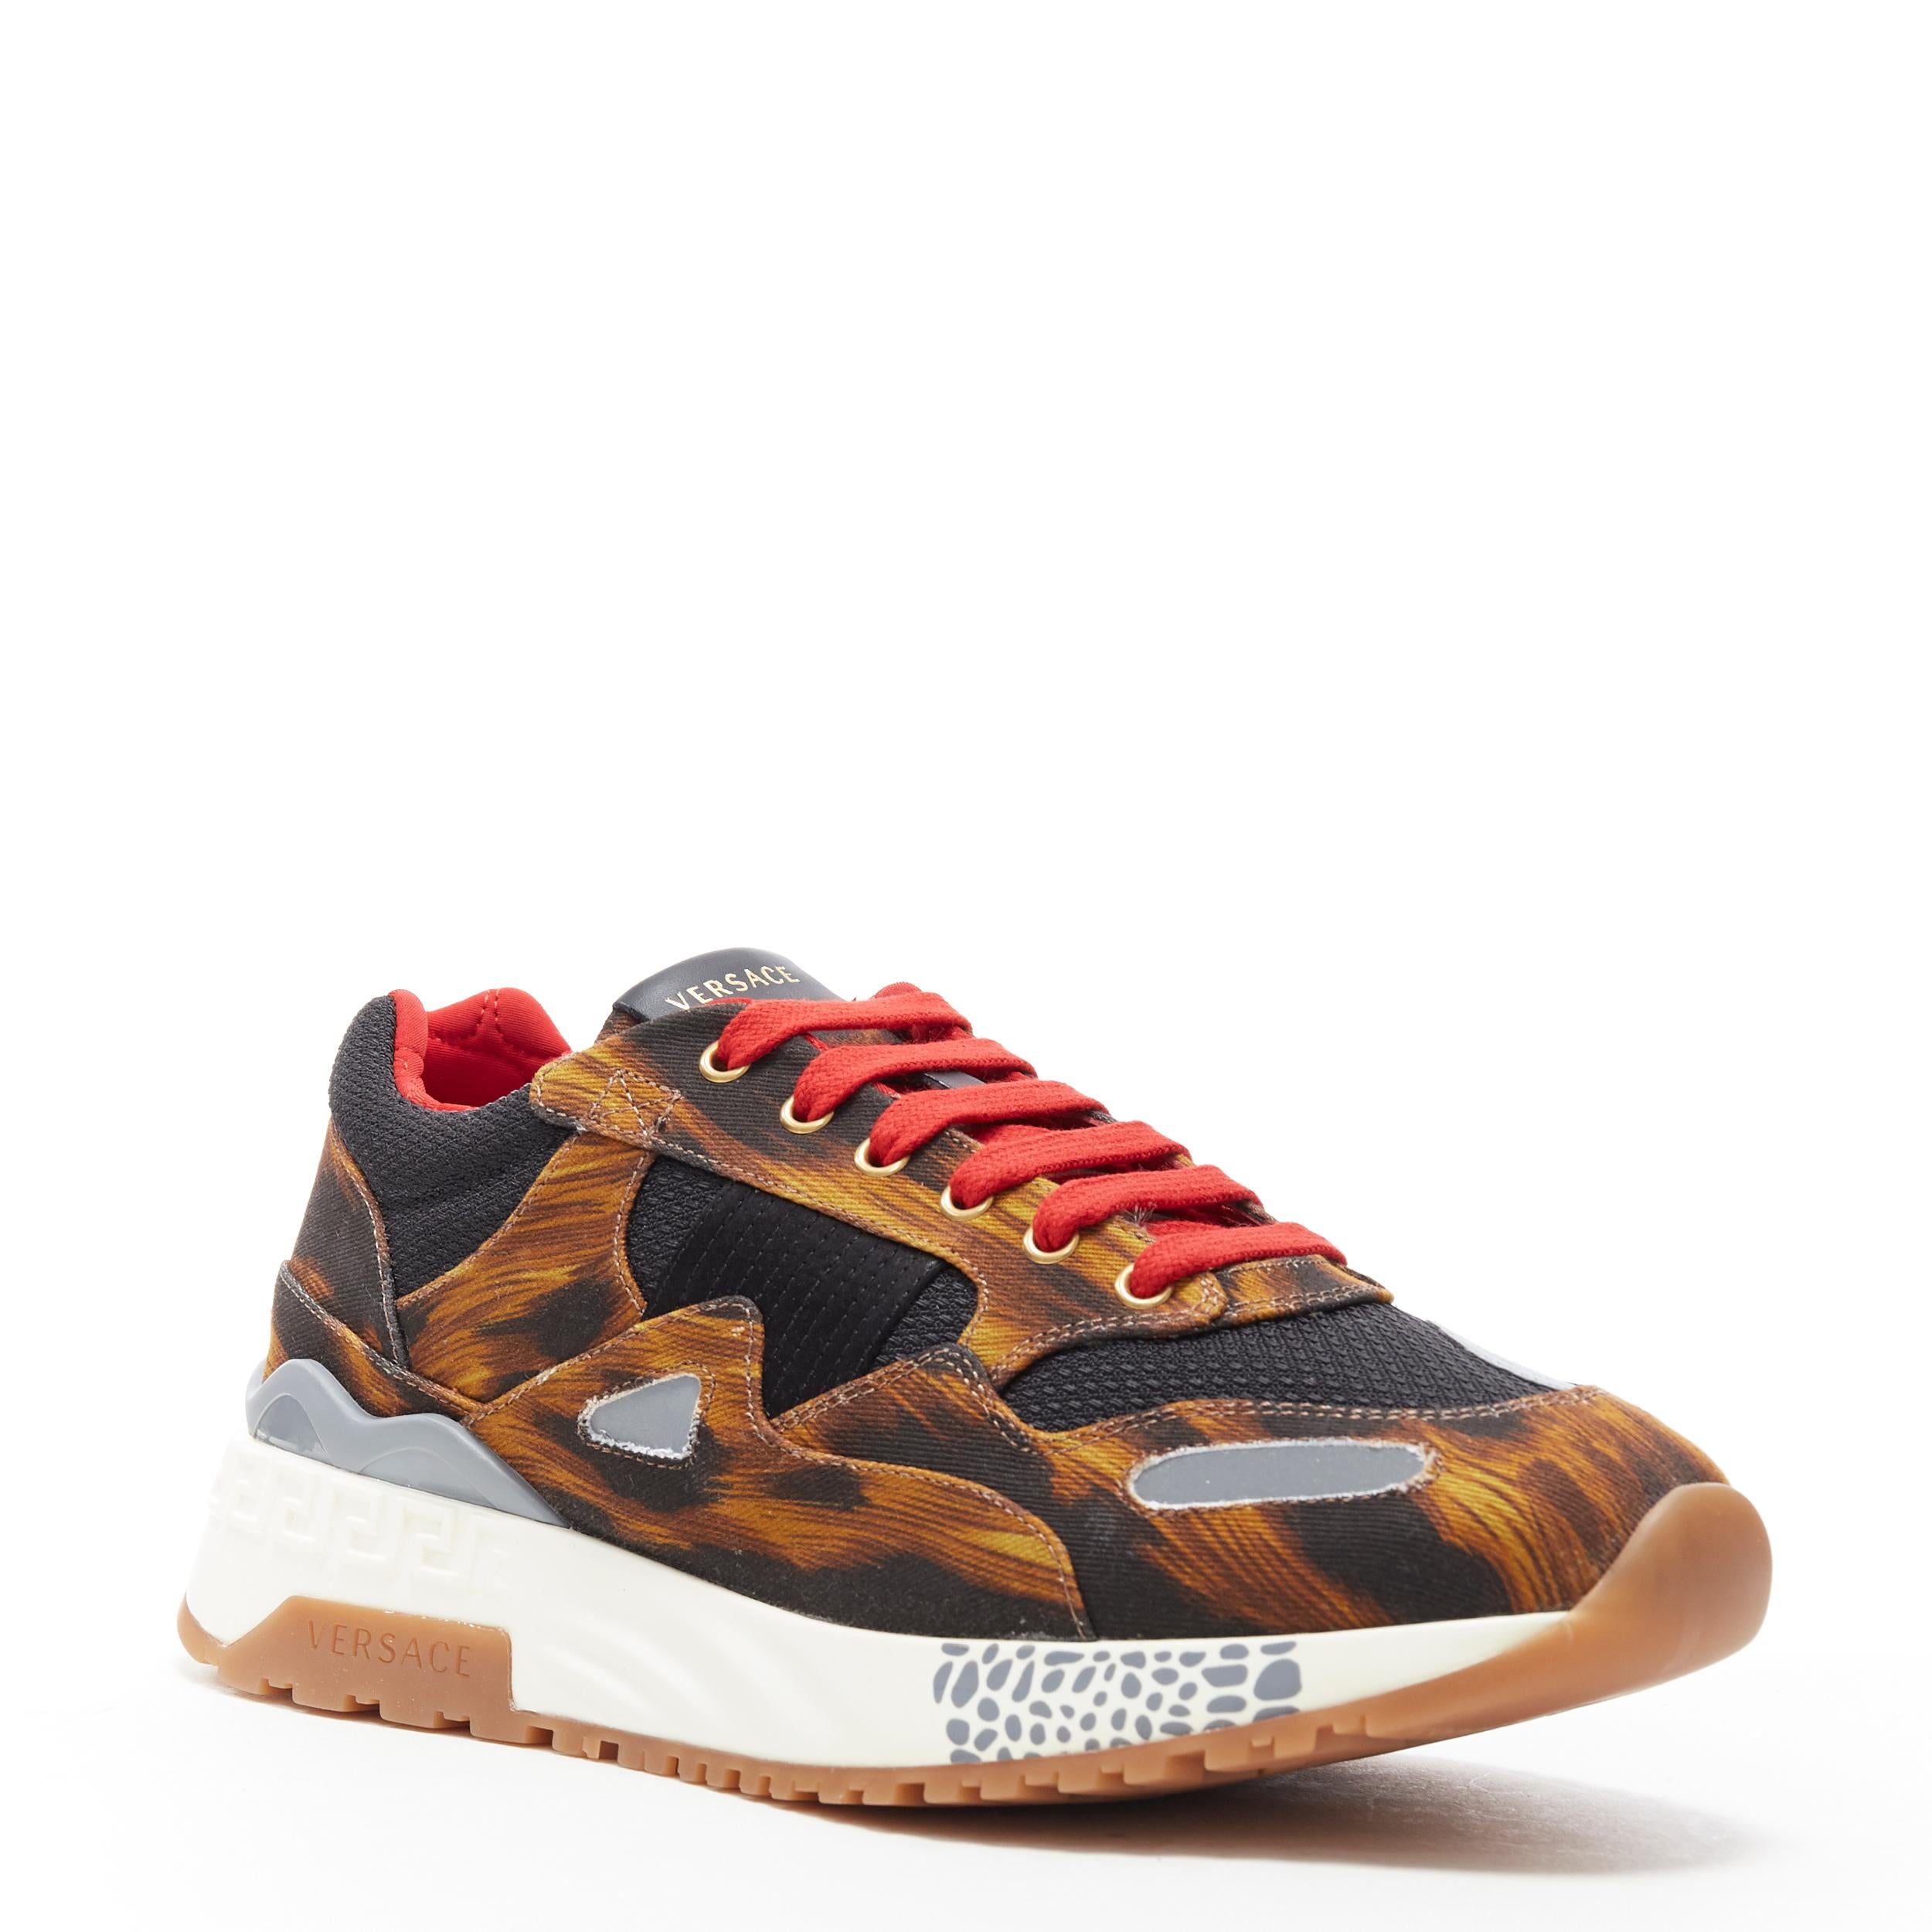 new VERSACE Achilles leopard Animalier Mix print chunky sole dad sneakers EU41.5
Brand: Versace
Designer: Donatella Versace
Model Name / Style: Achilles sneakers
Material: Fabric
Color: Brown
Pattern: Animal Print
Closure: Lace up
Lining material: